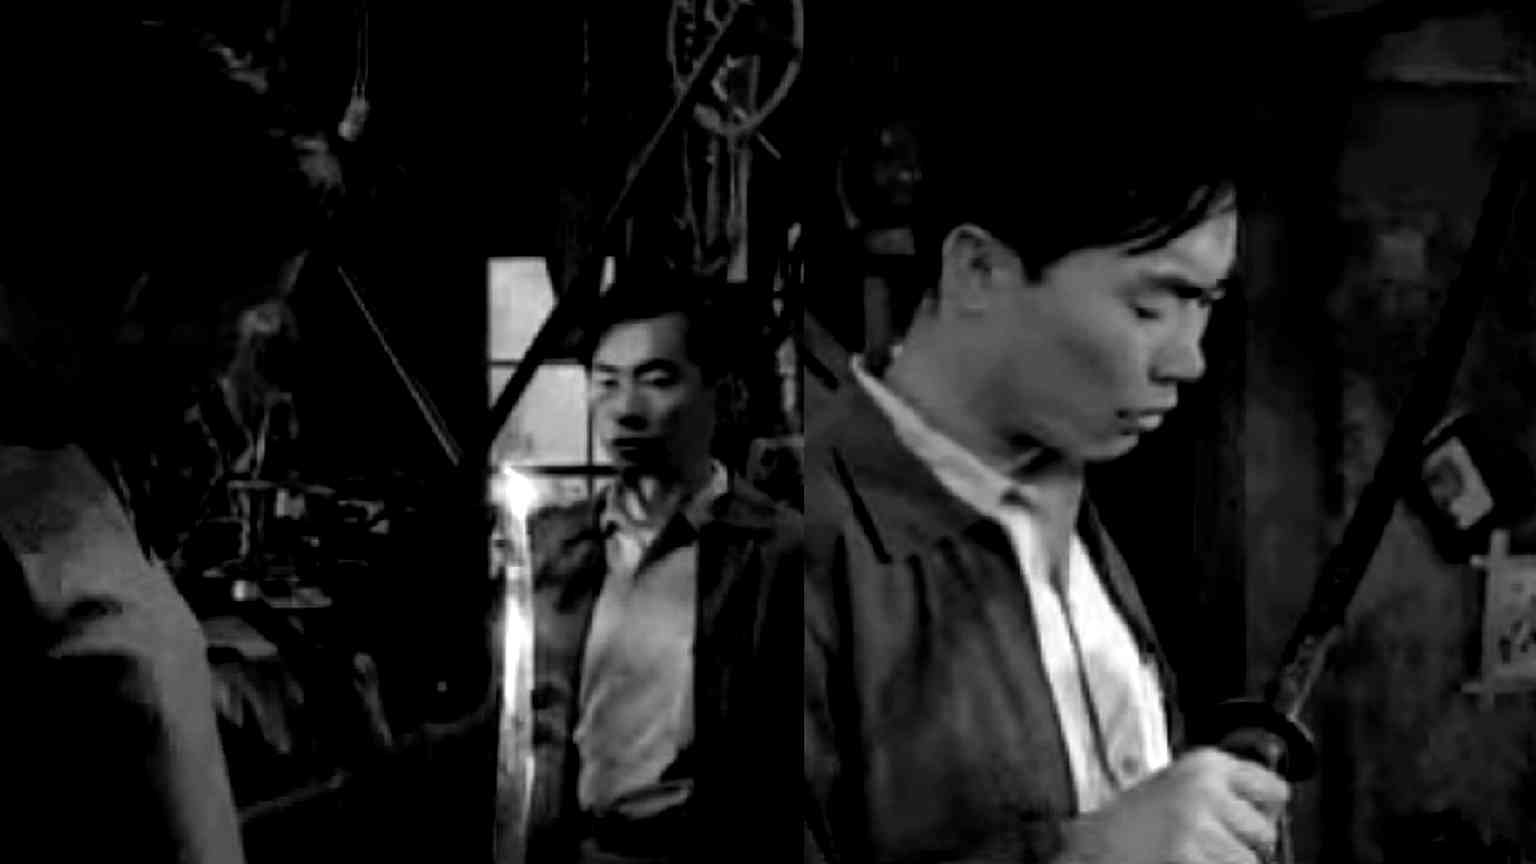 Banned George Takei ‘The Twilight Zone’ episode now available to stream